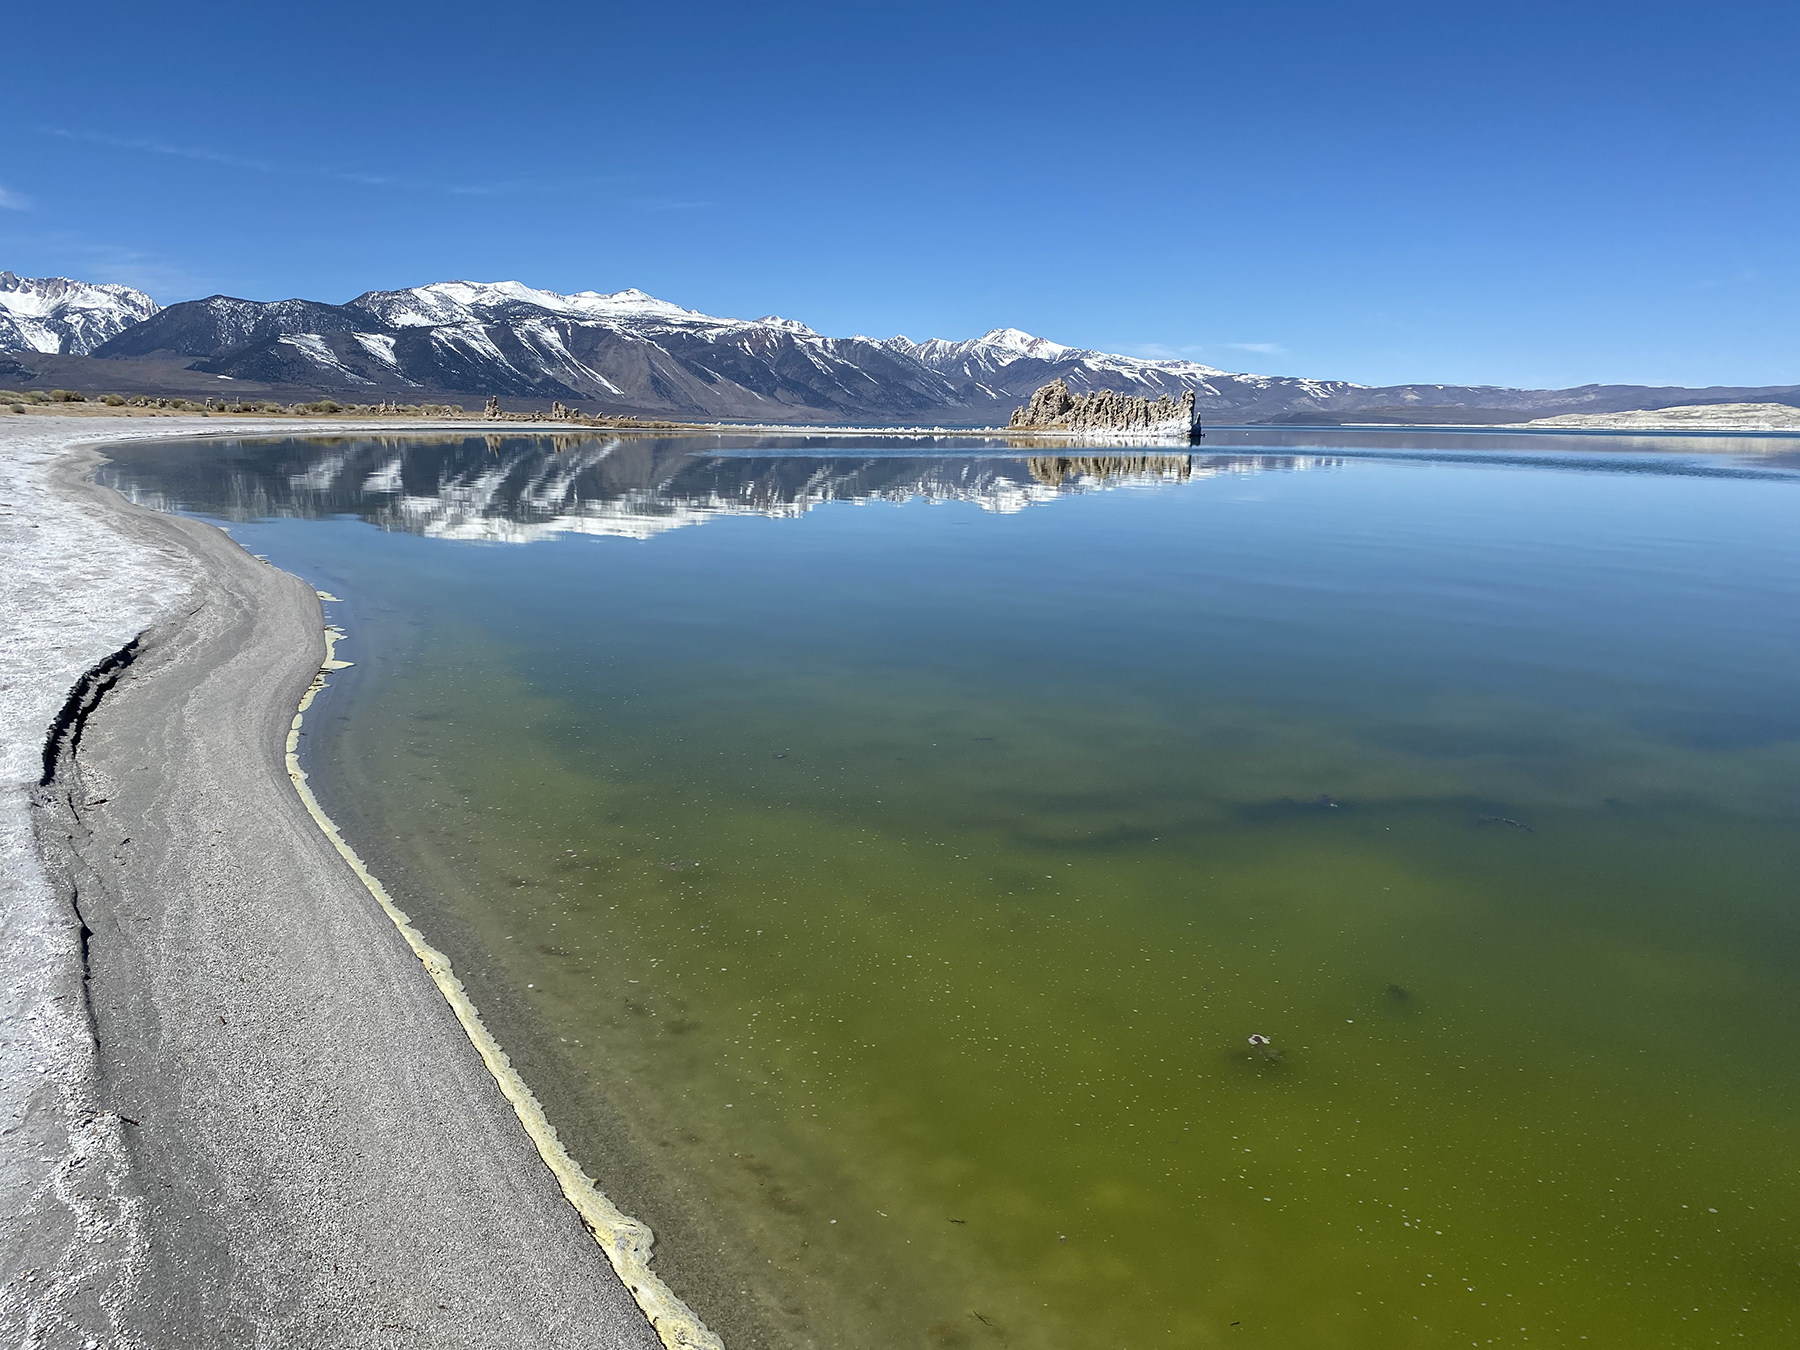 The south shore of Mono Lake in April 2021. (Photograph courtesy of the Mono Lake Committee)